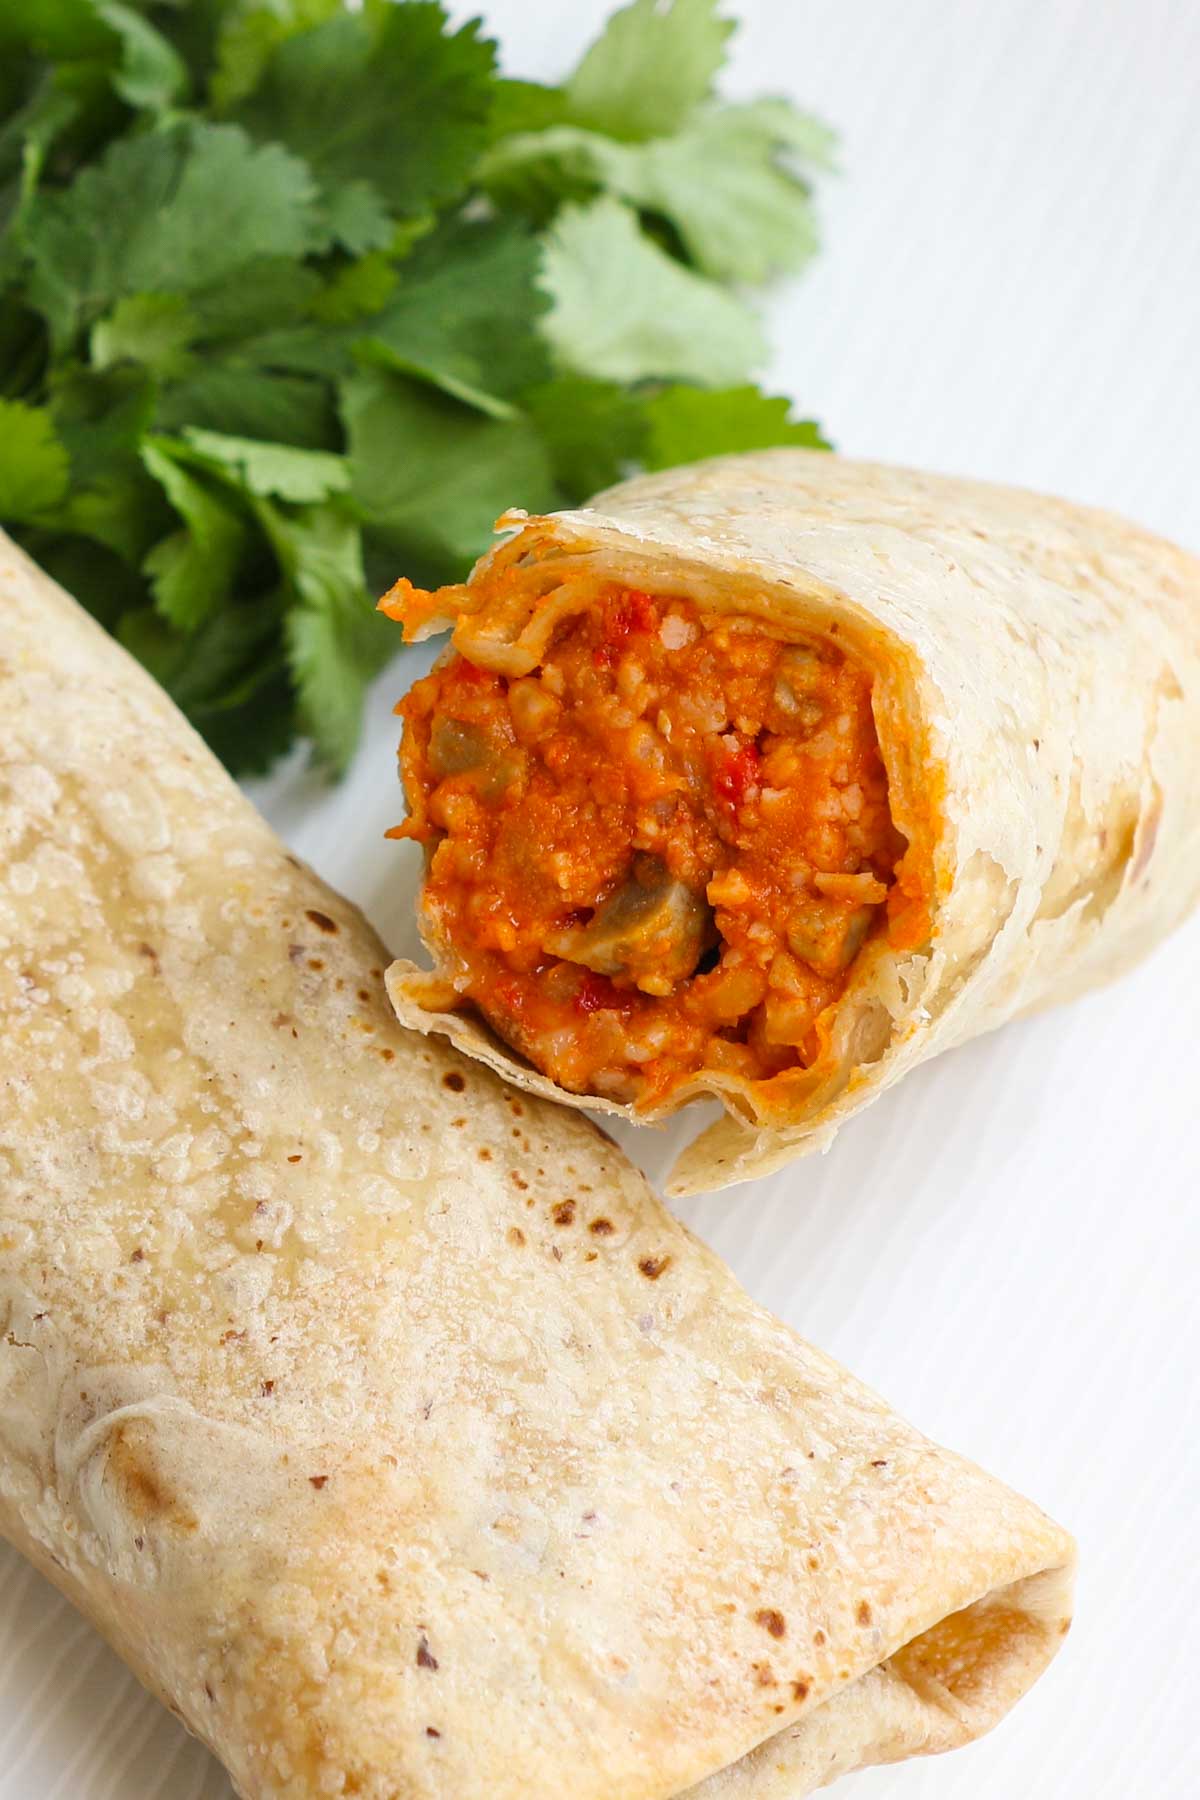 Cooking Frozen Burritos in Air Fryer is the easiest way to prepare a perfect lunch, dinner, or even breakfast. These air fryer frozen burritos are soft and flavorful on the inside and crispy on the outside. You can use this method to cook chimichanga too! Keep some frozen burritos in the freezer and you can satisfy your Mexican food cravings at any time!